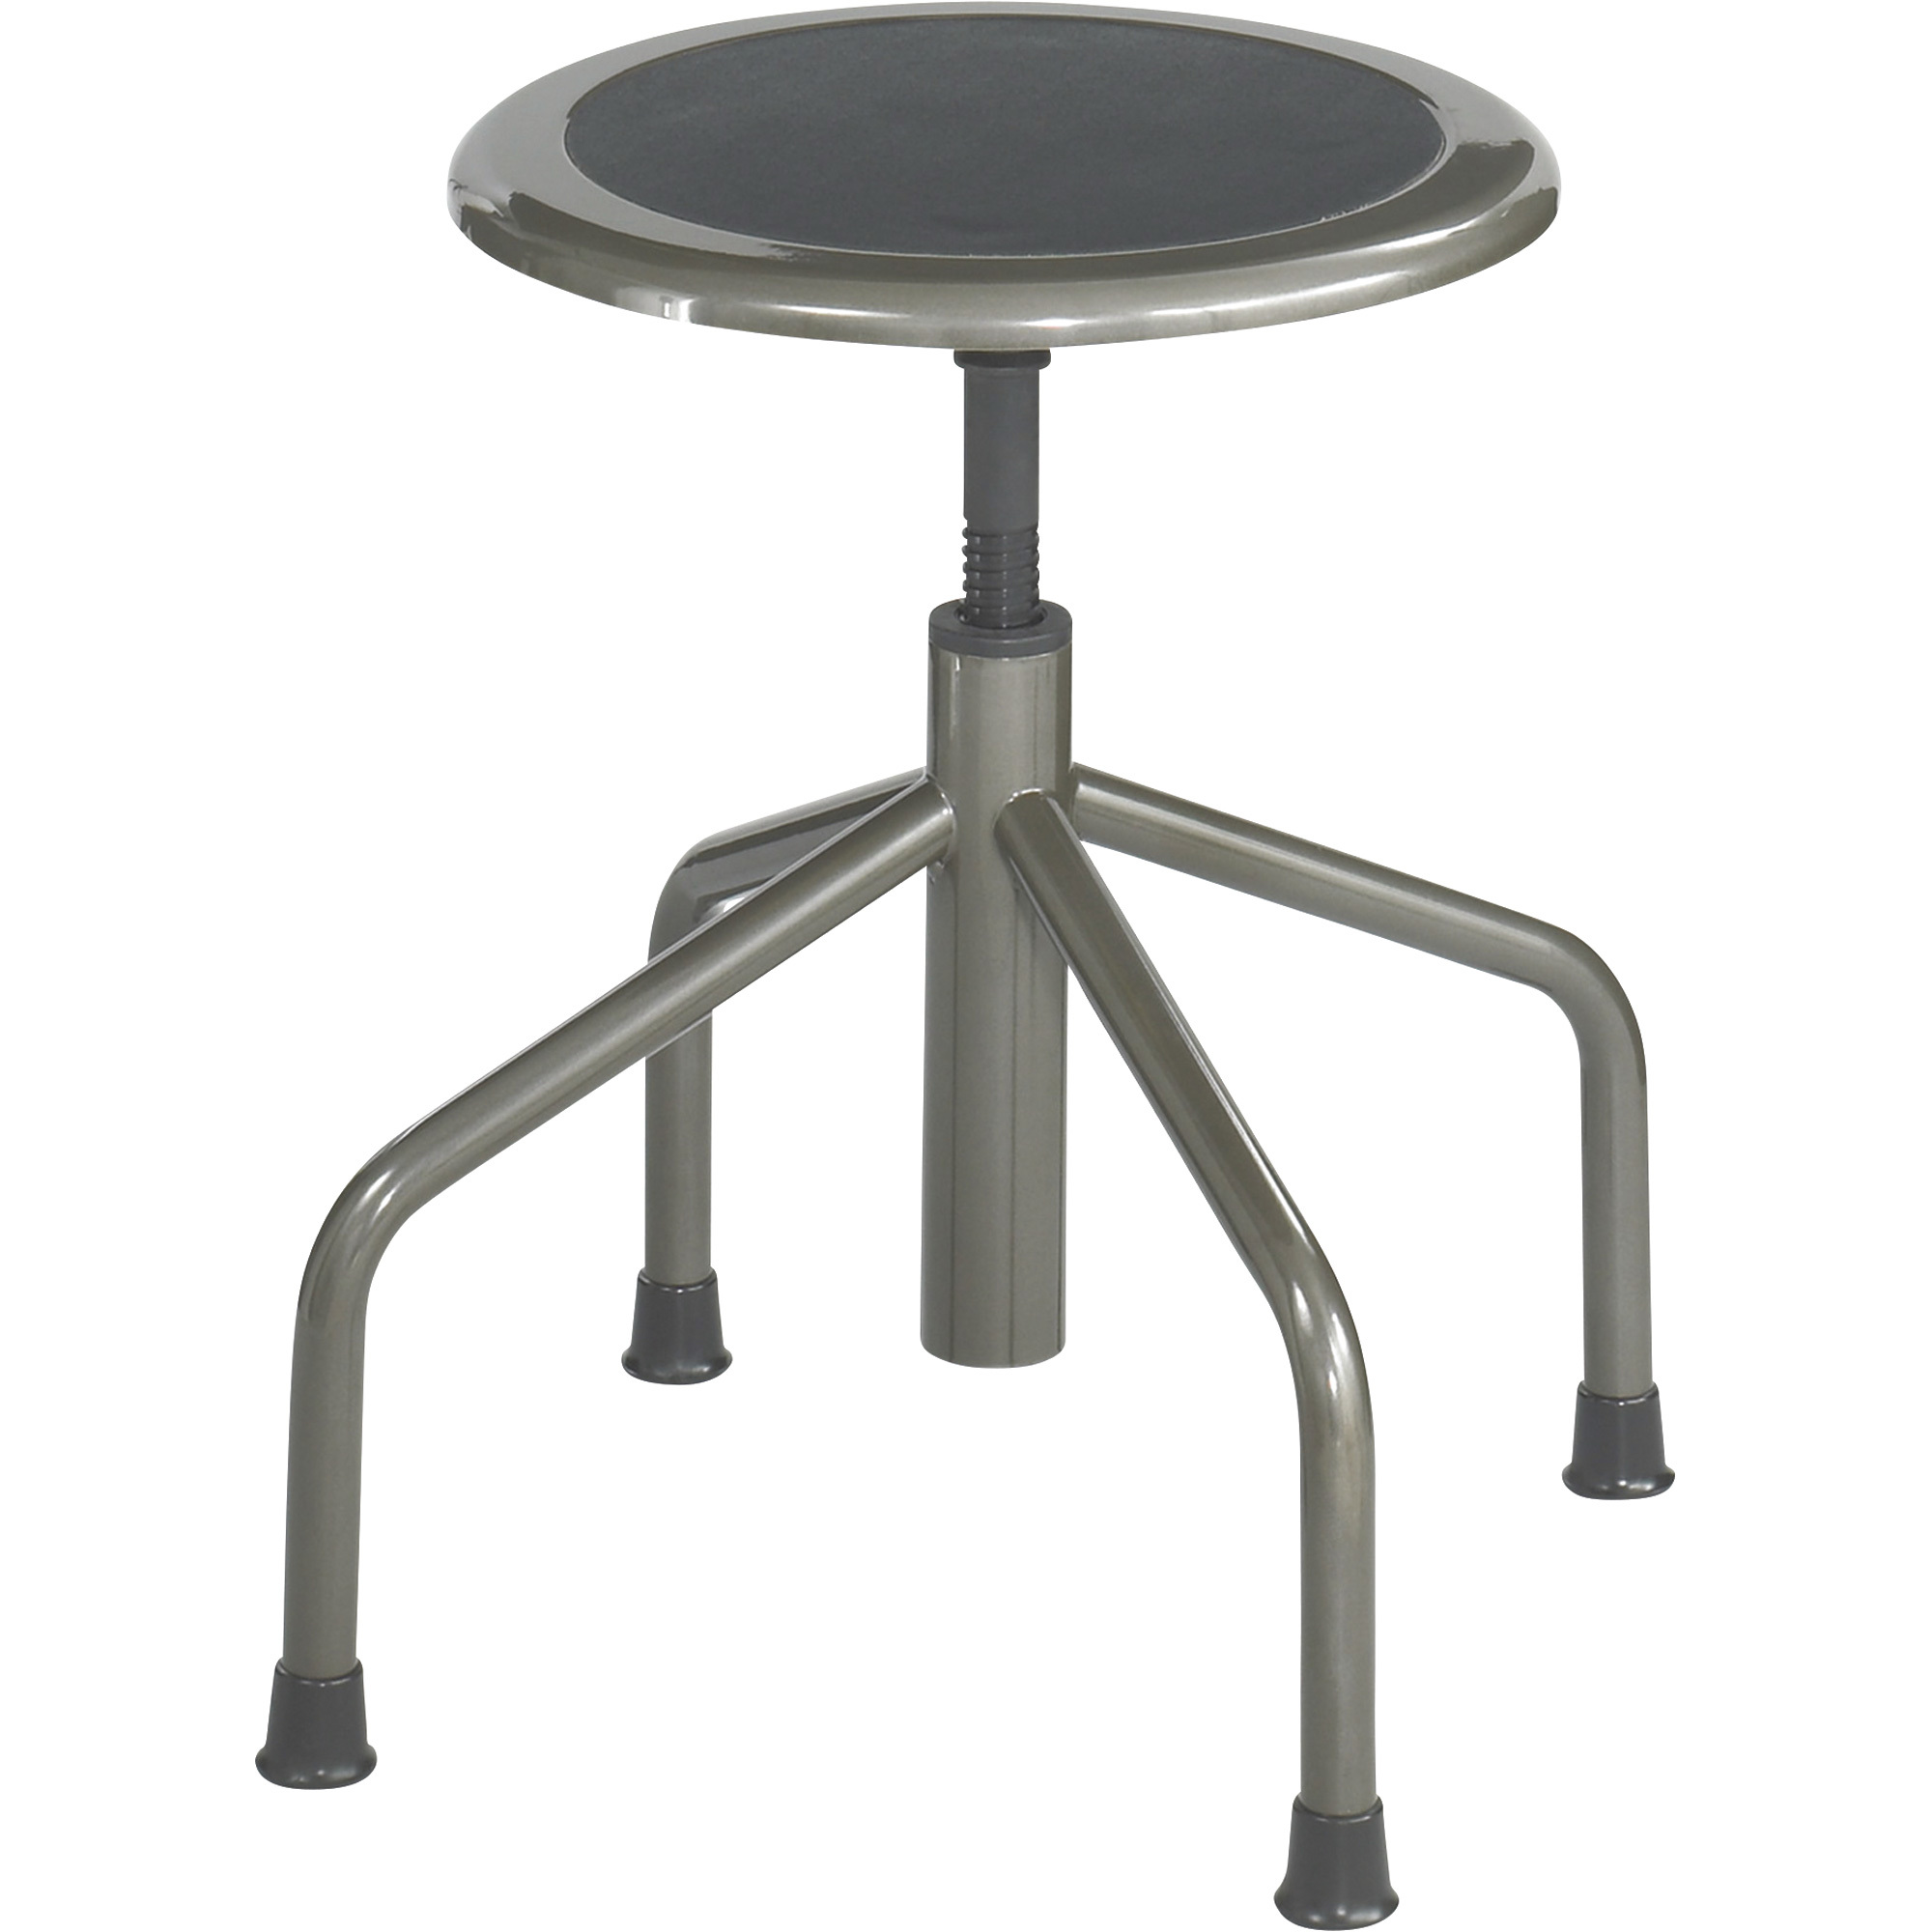 Safco Diesel Low Base Steel Industrial Stool — 15Inch Diameter x 16-22Inch H, Pewter, Model 6665 -  Mayline Safco, 6669